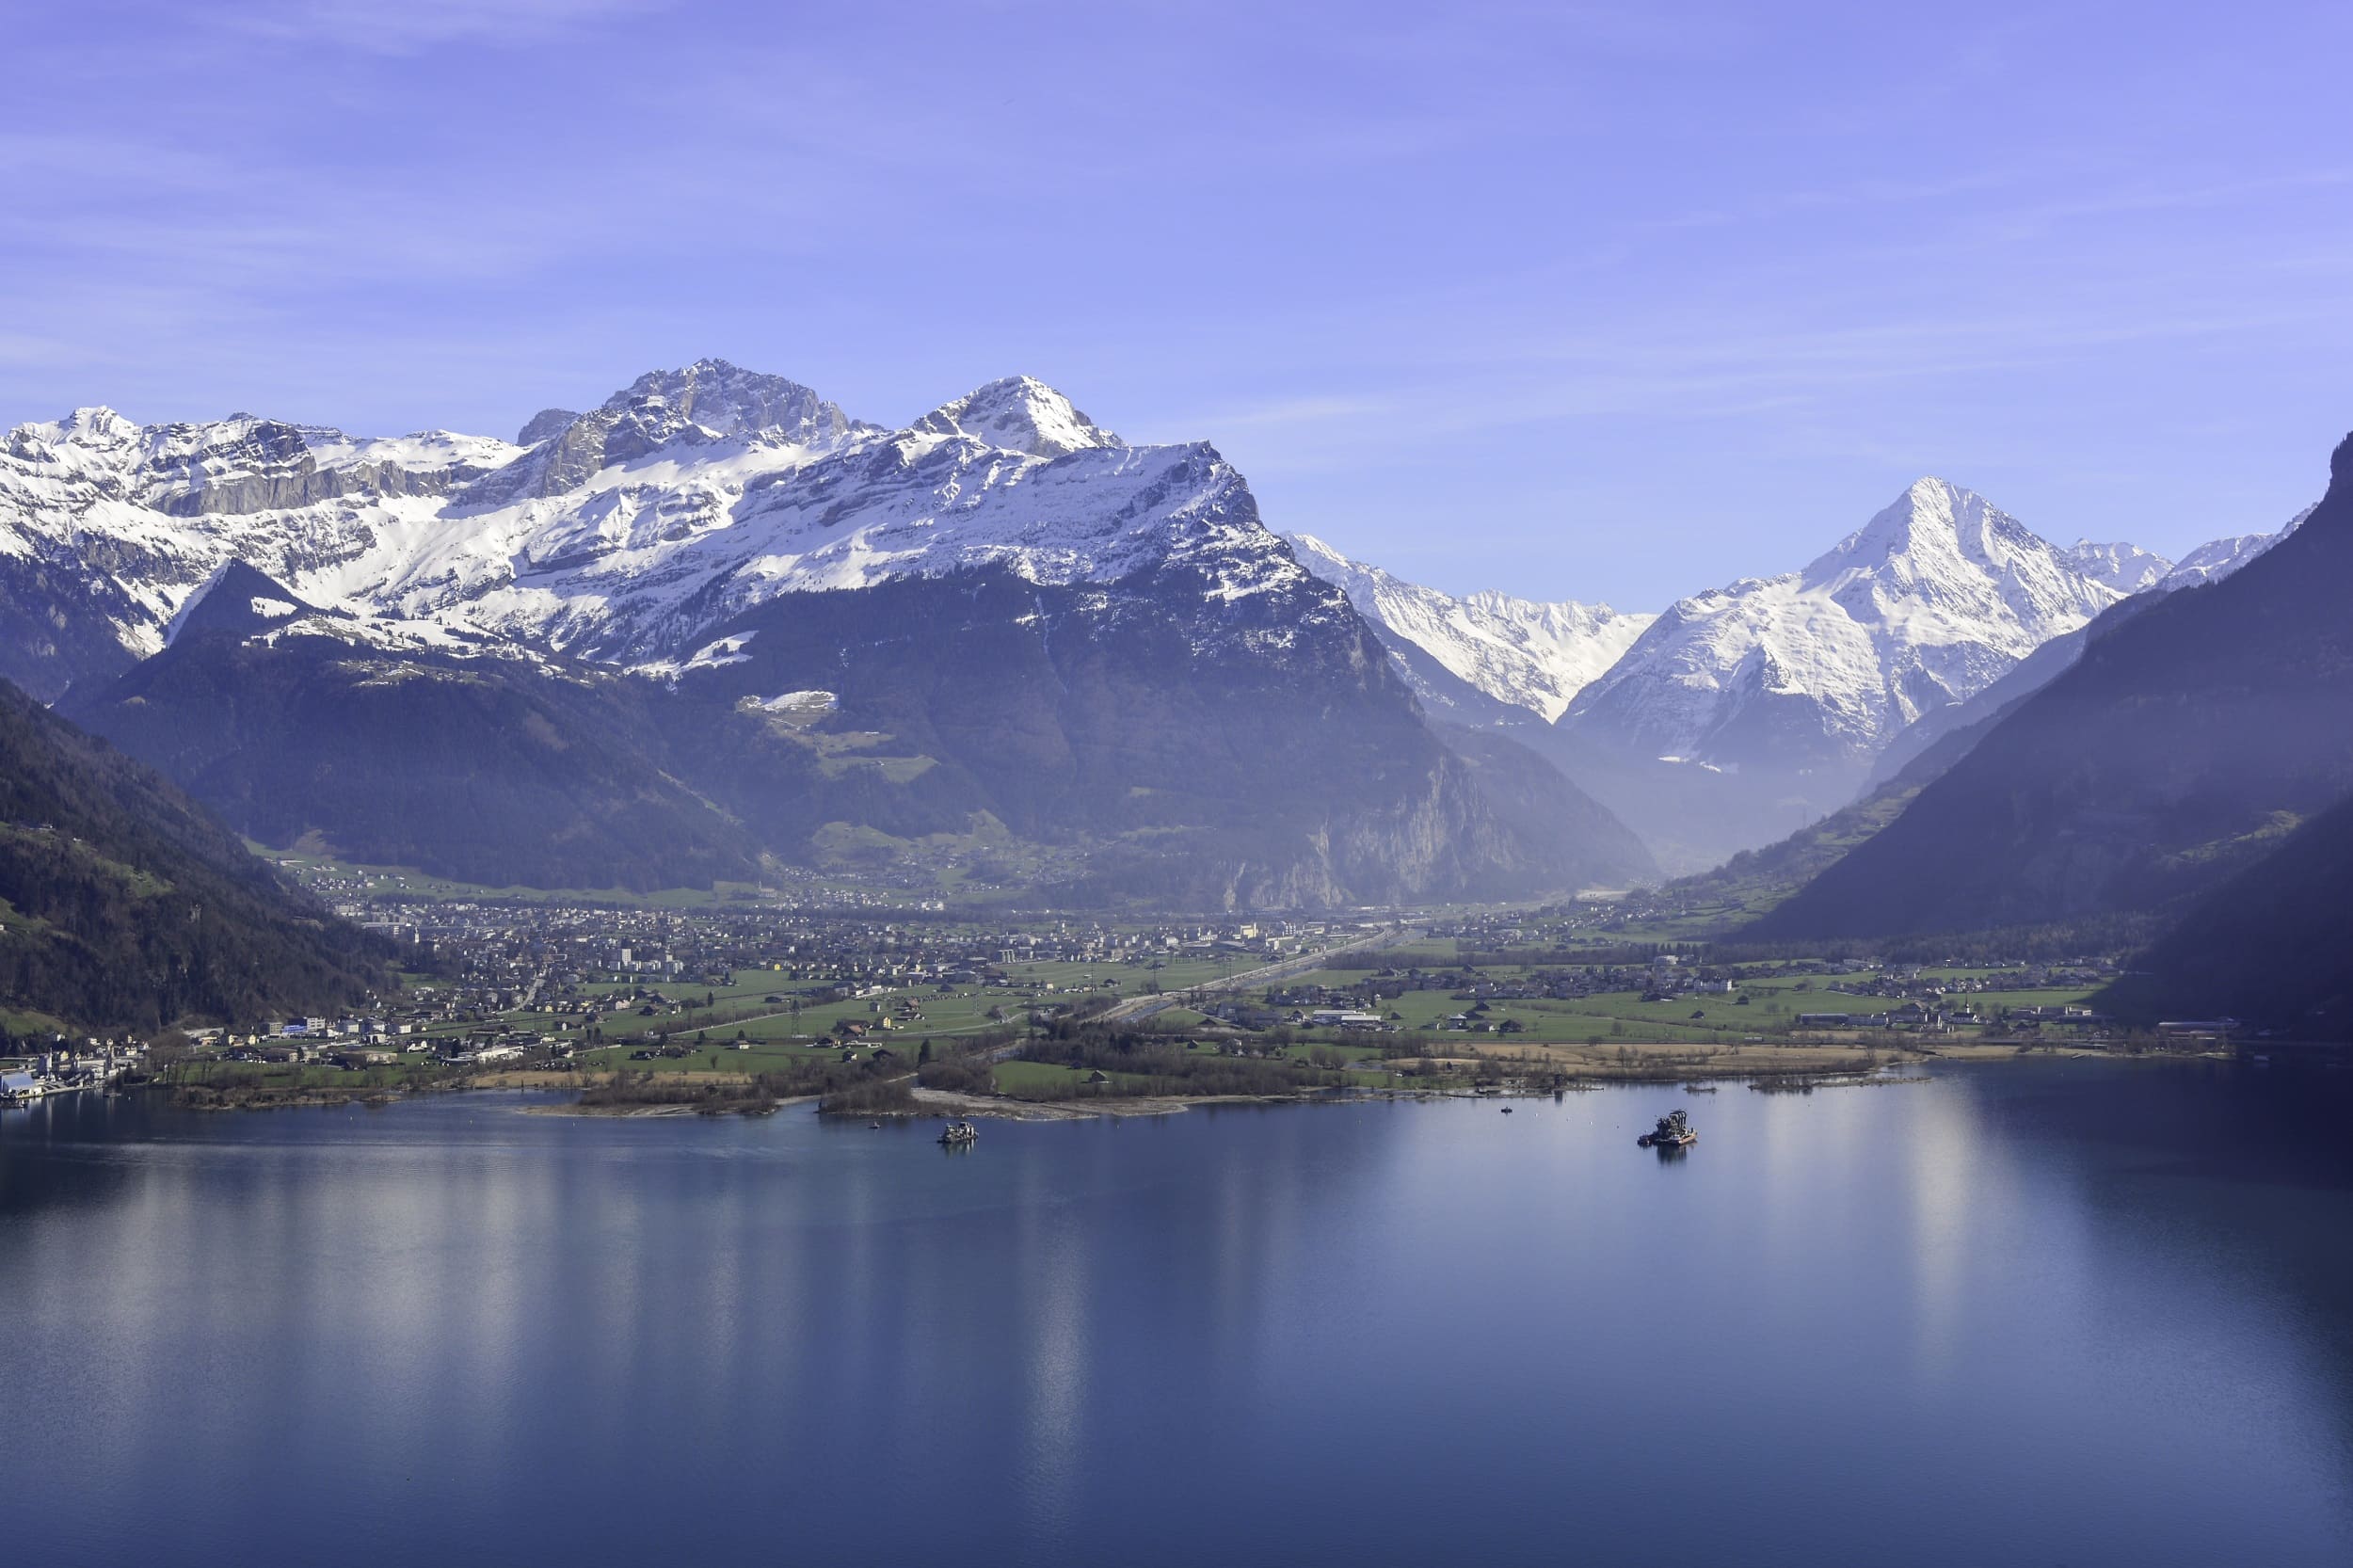 Altdorf is located between Lake Lucerne and the Alps